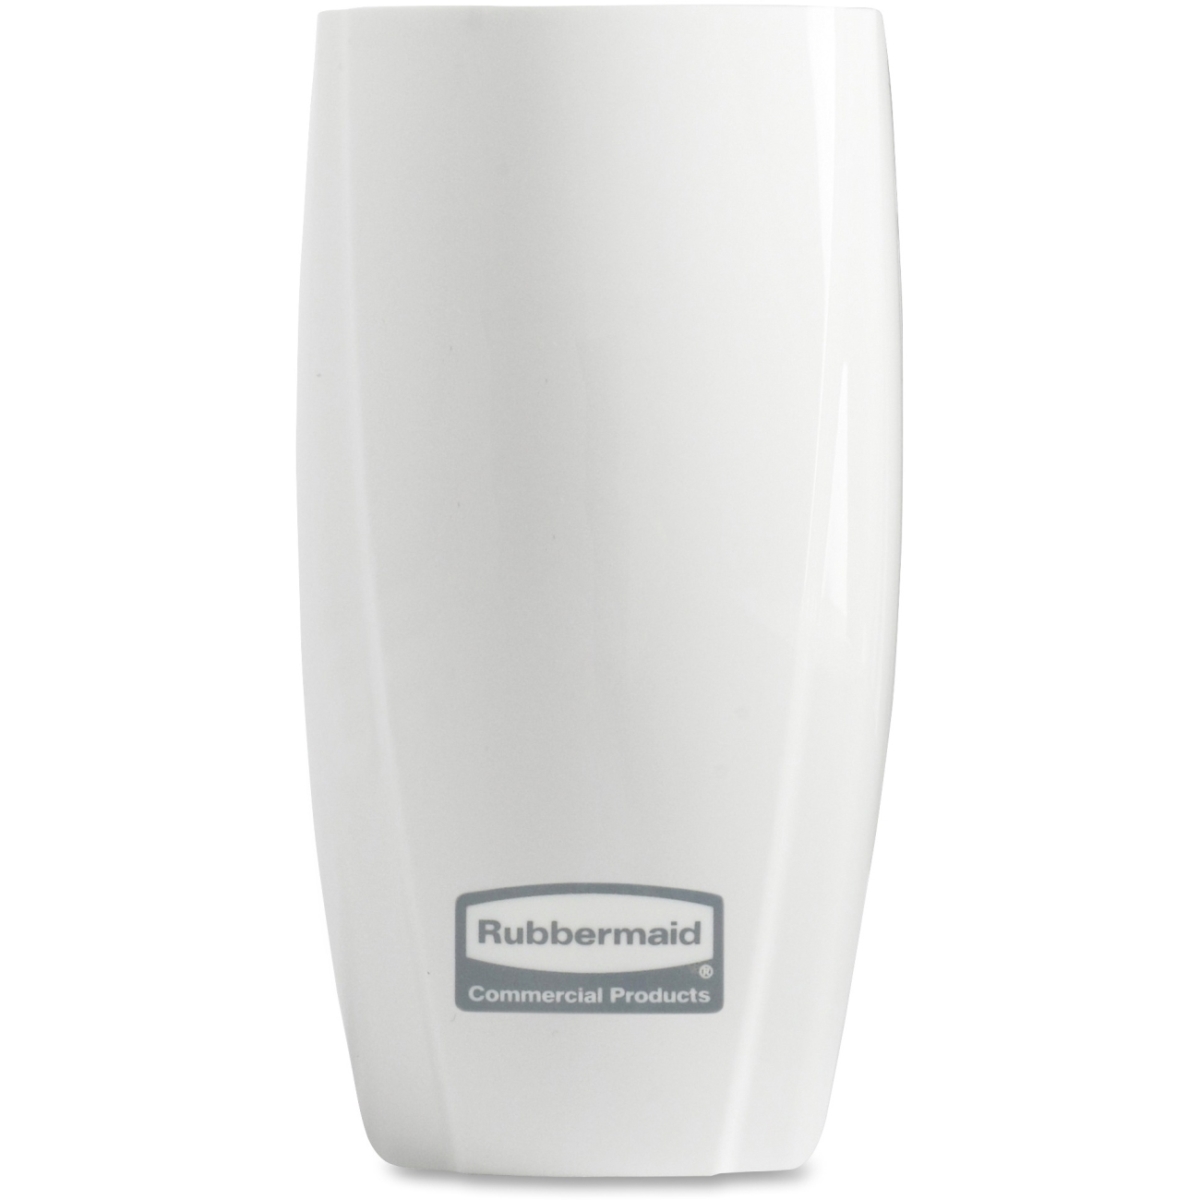 Picture of Rubbermaid Commercial Products 1793547 Air Freshener, White